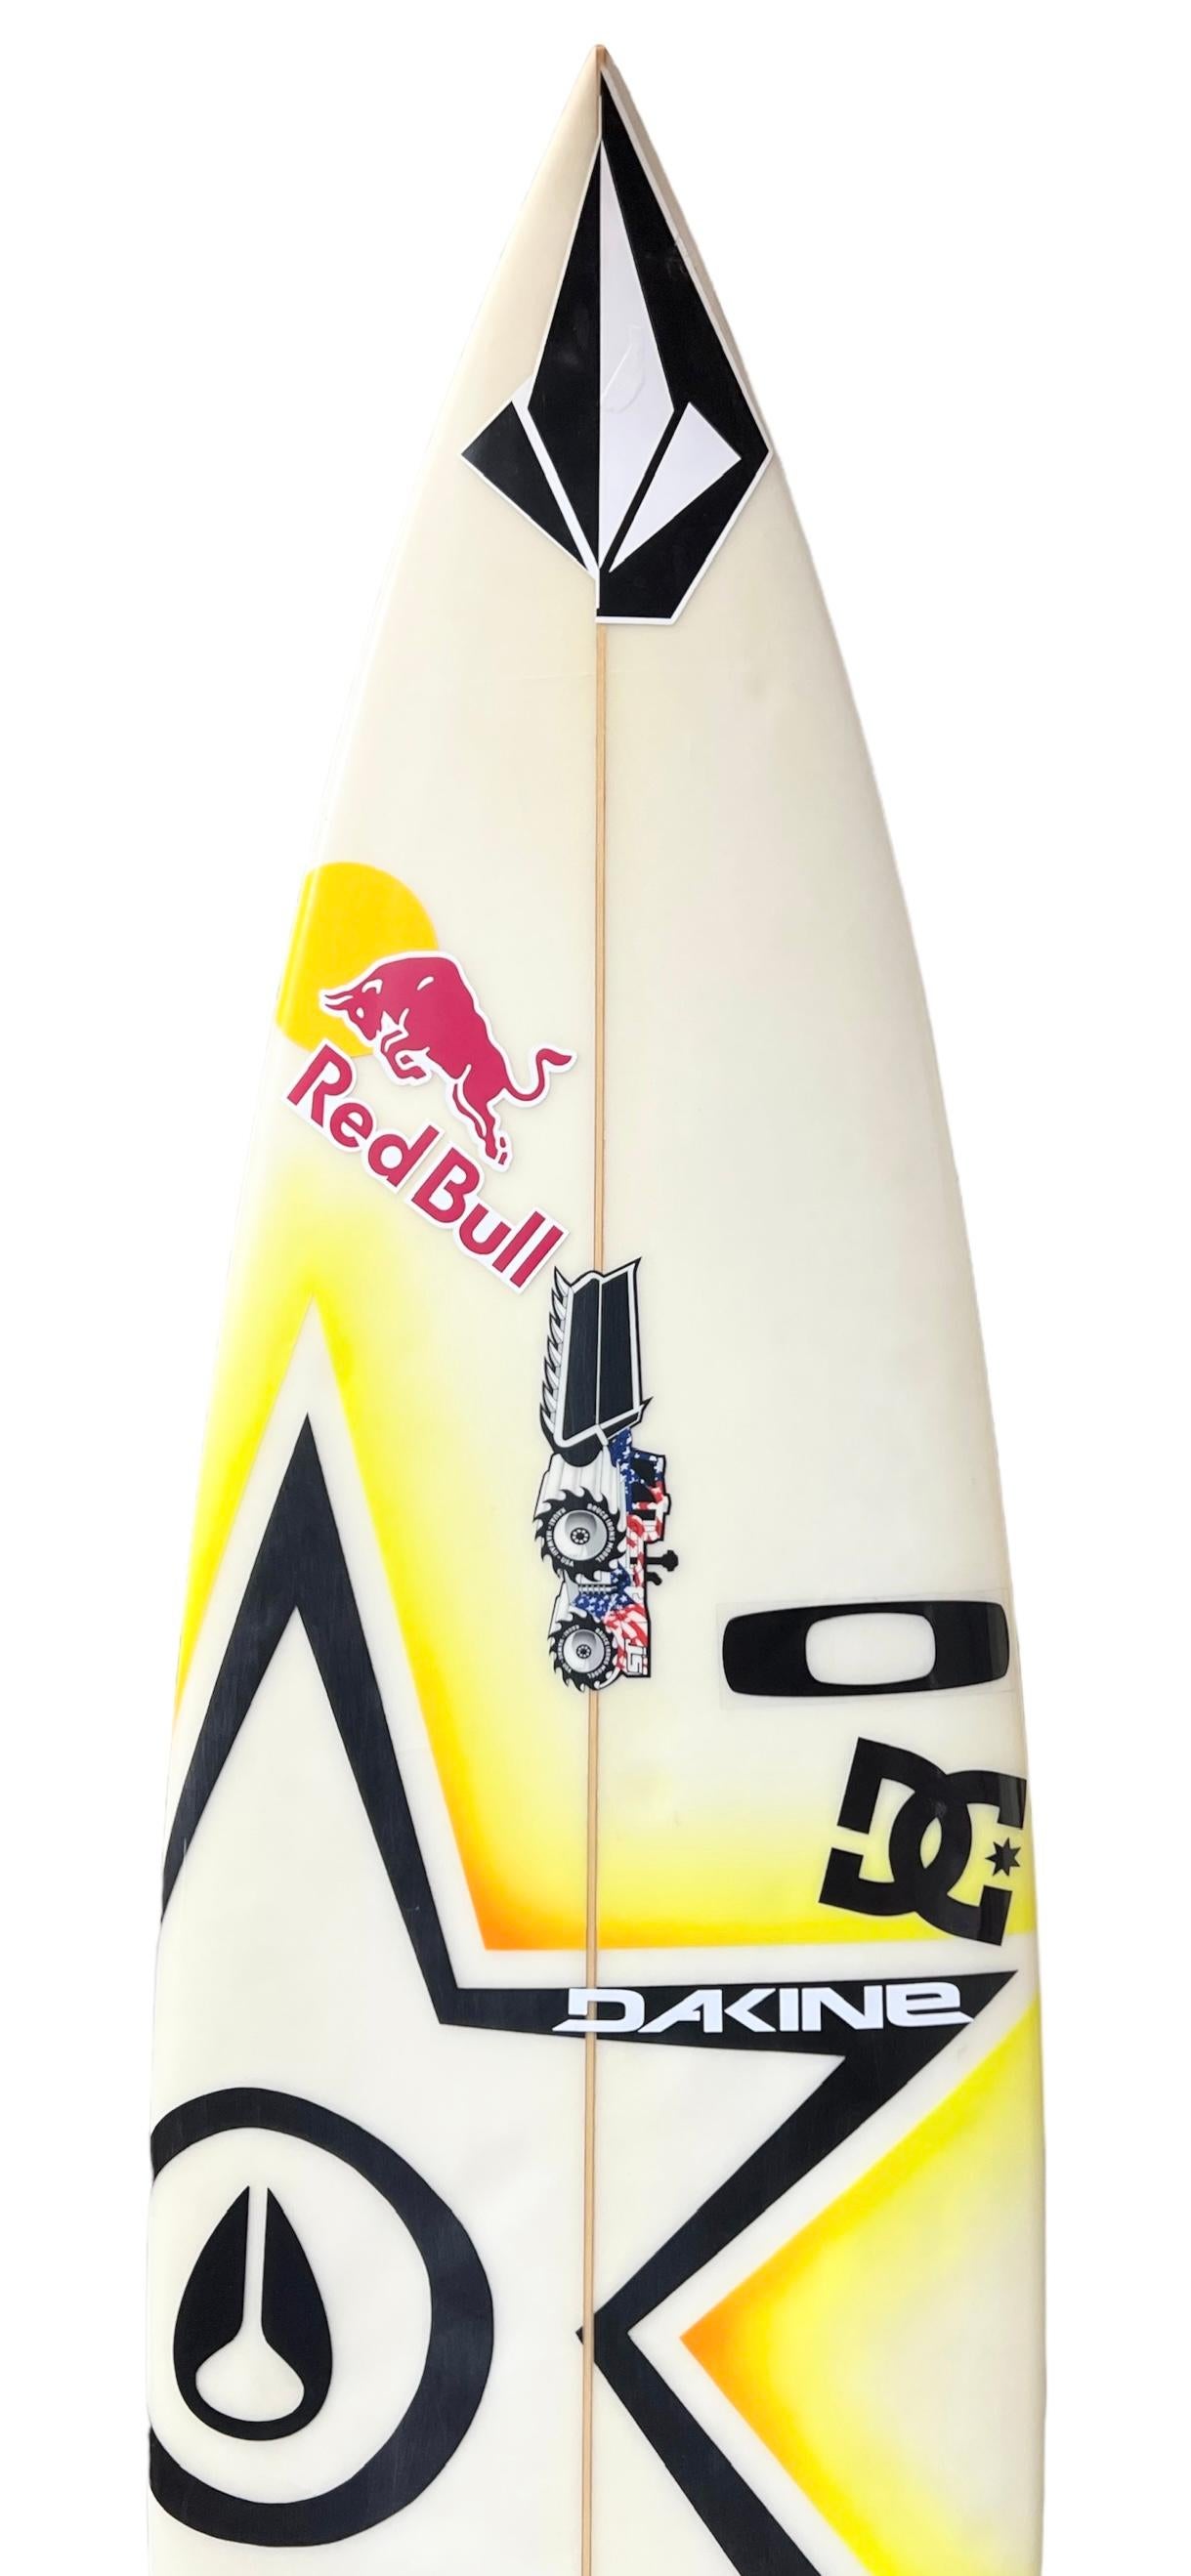 andy irons surfboard